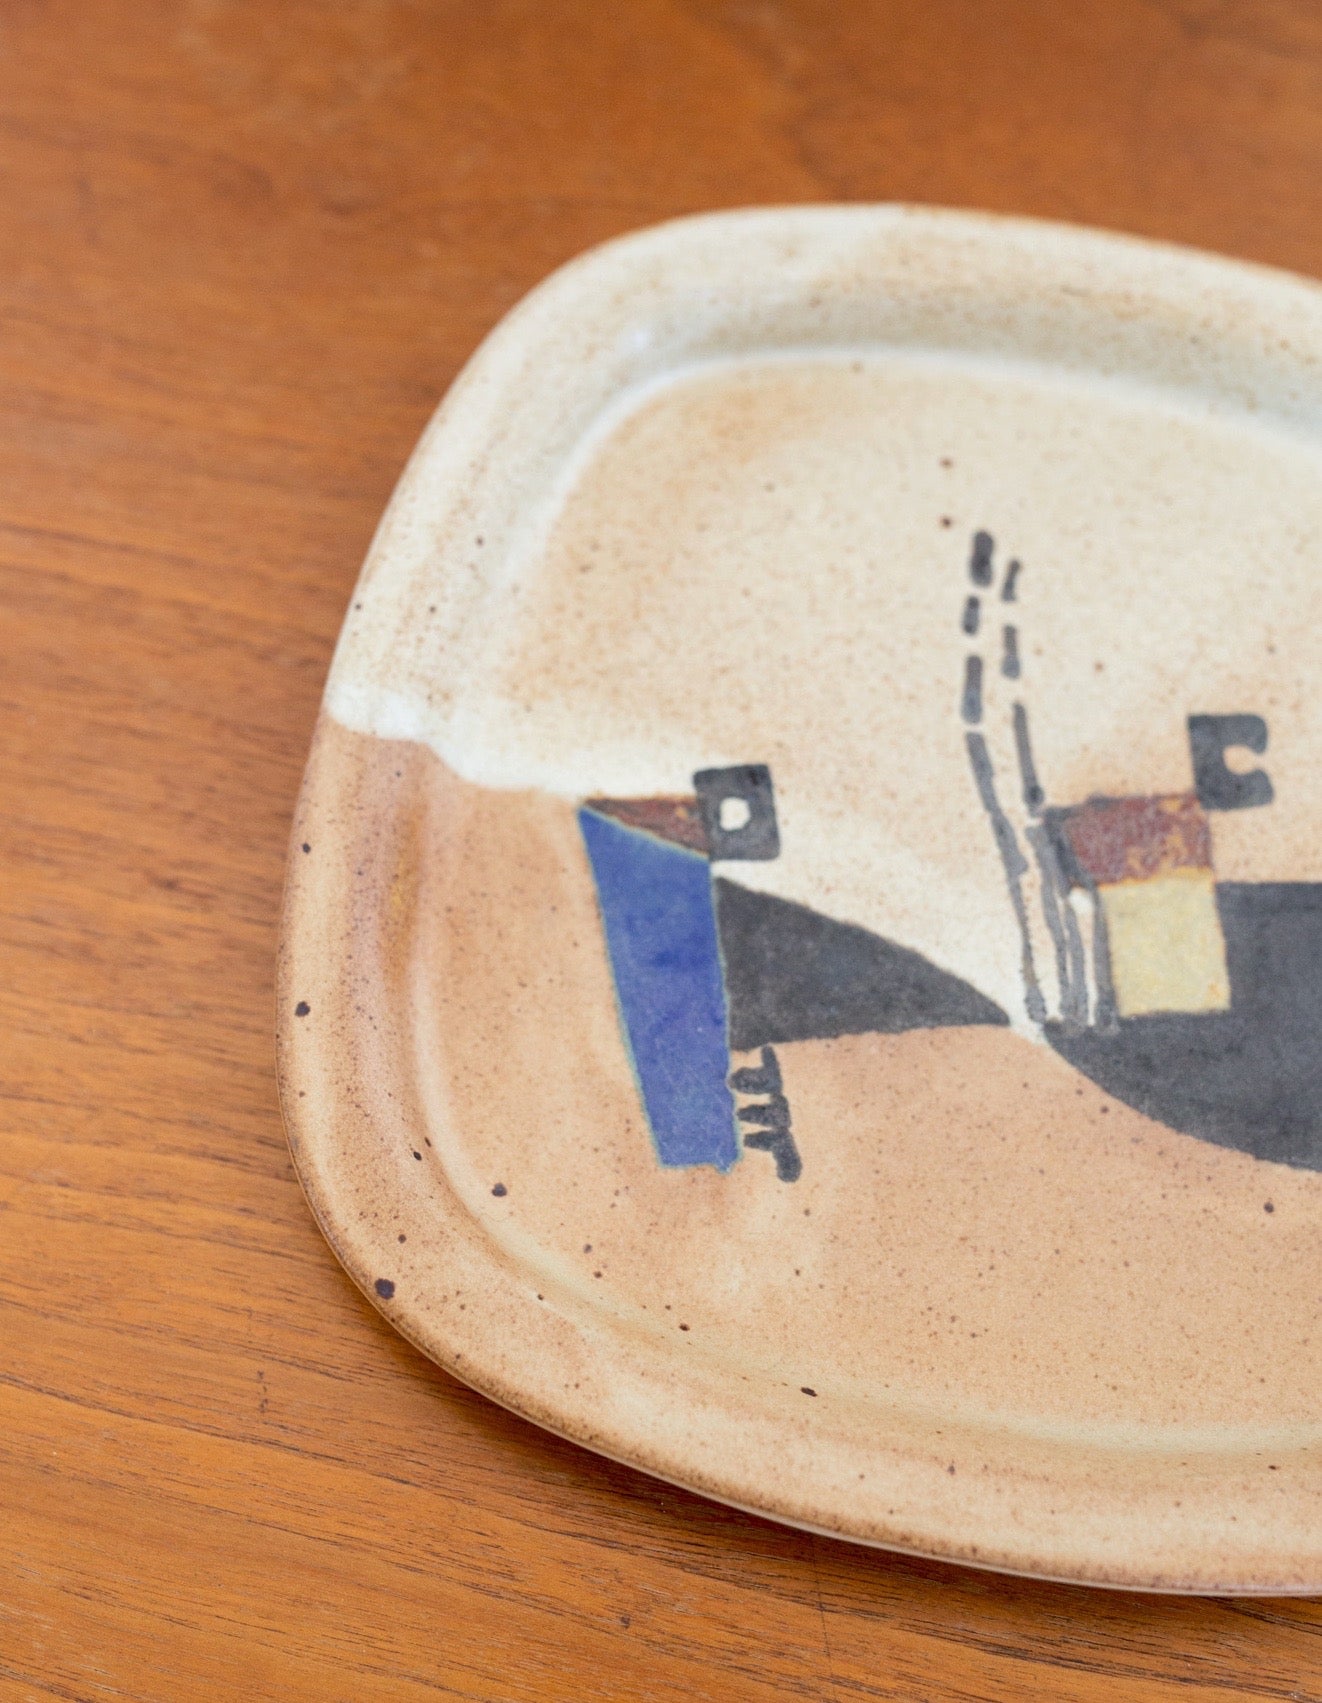 Abstract pottery plate no. 1